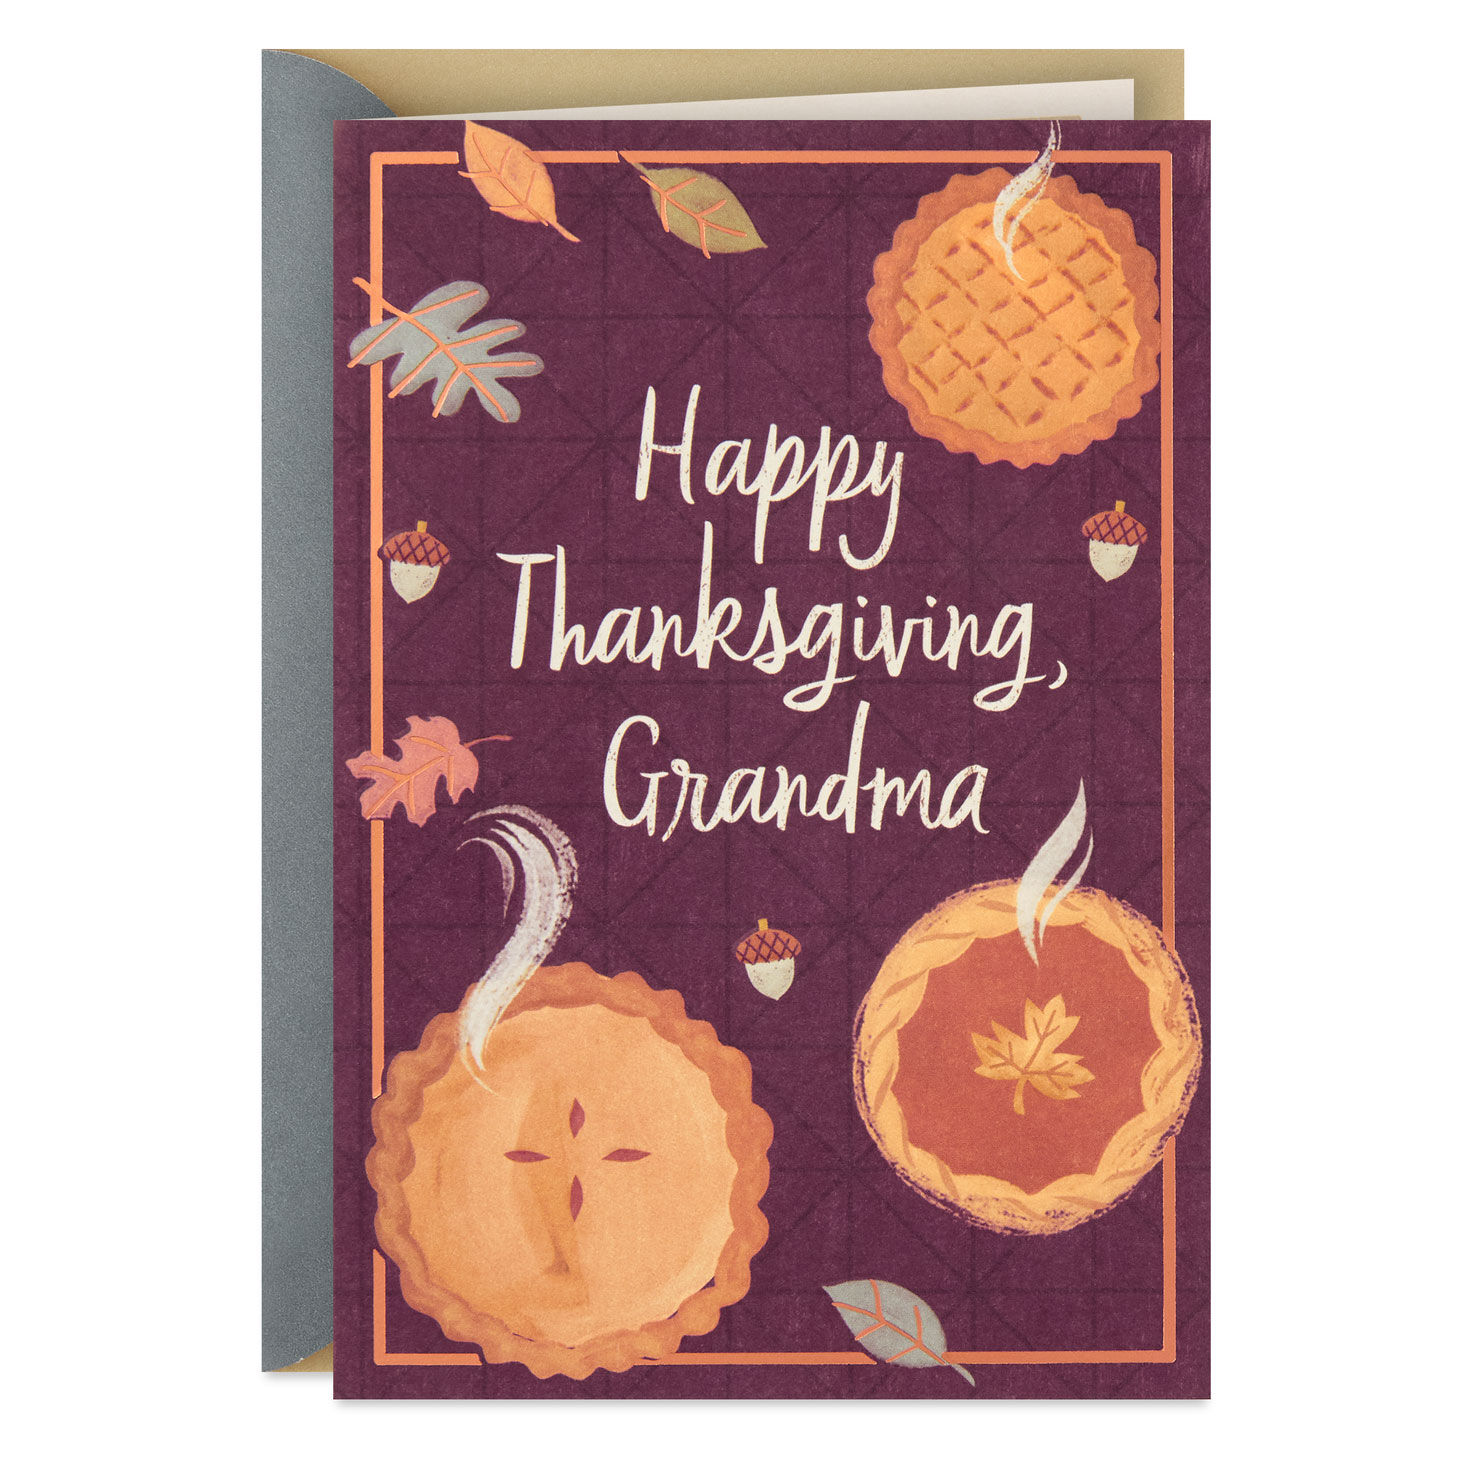 Grateful For Your Love Thanksgiving Card For Grandma - Greeting Cards -  Hallmark